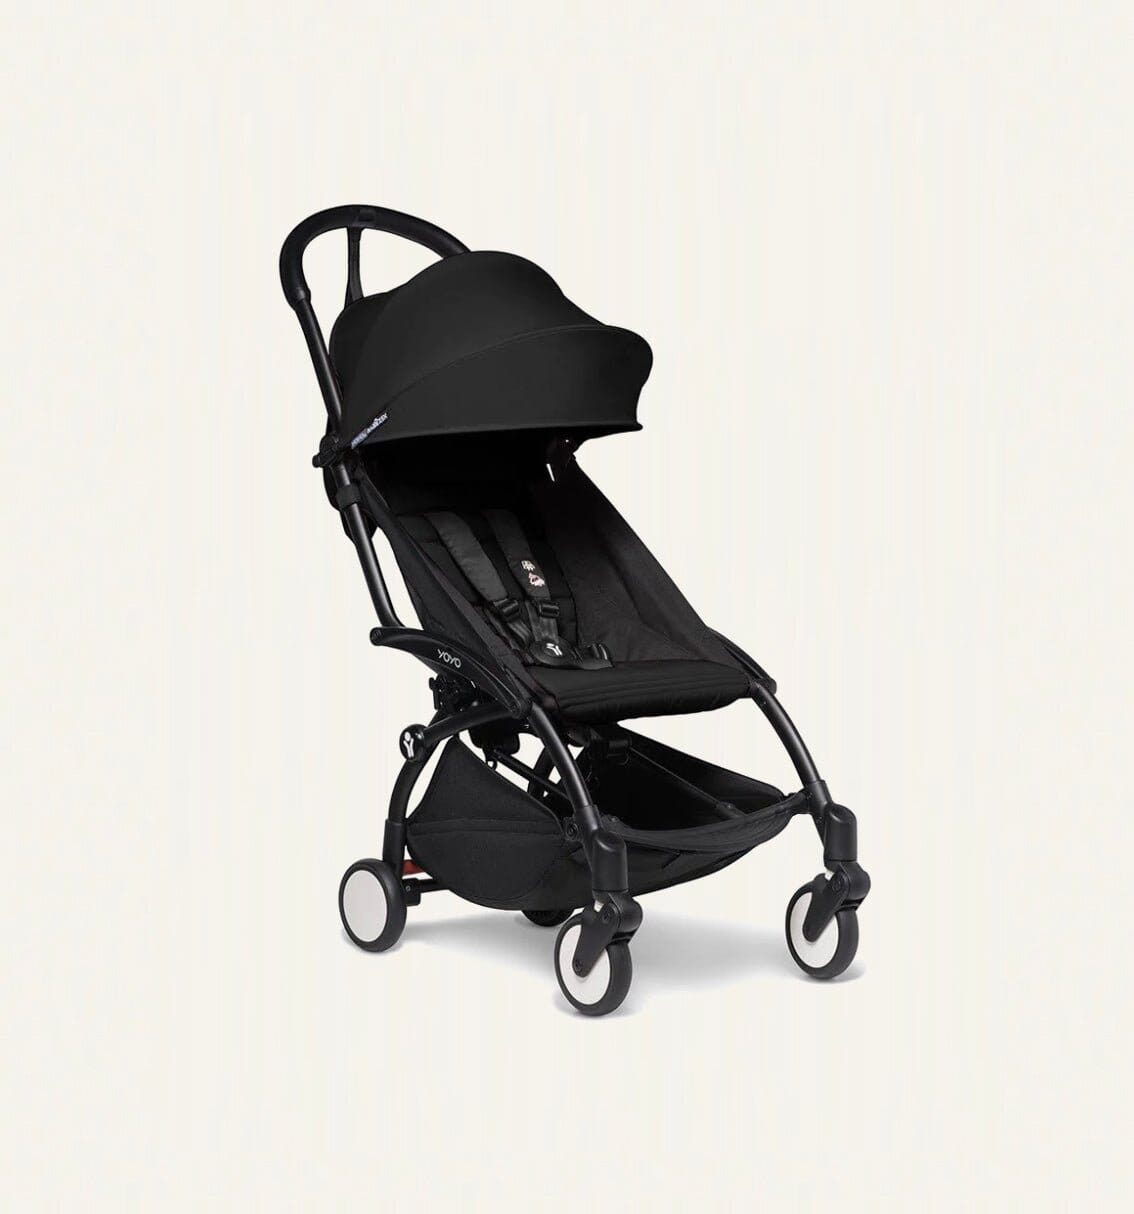 Rent Babyzen Yoyo Stroller from just £31 per month on baboodle